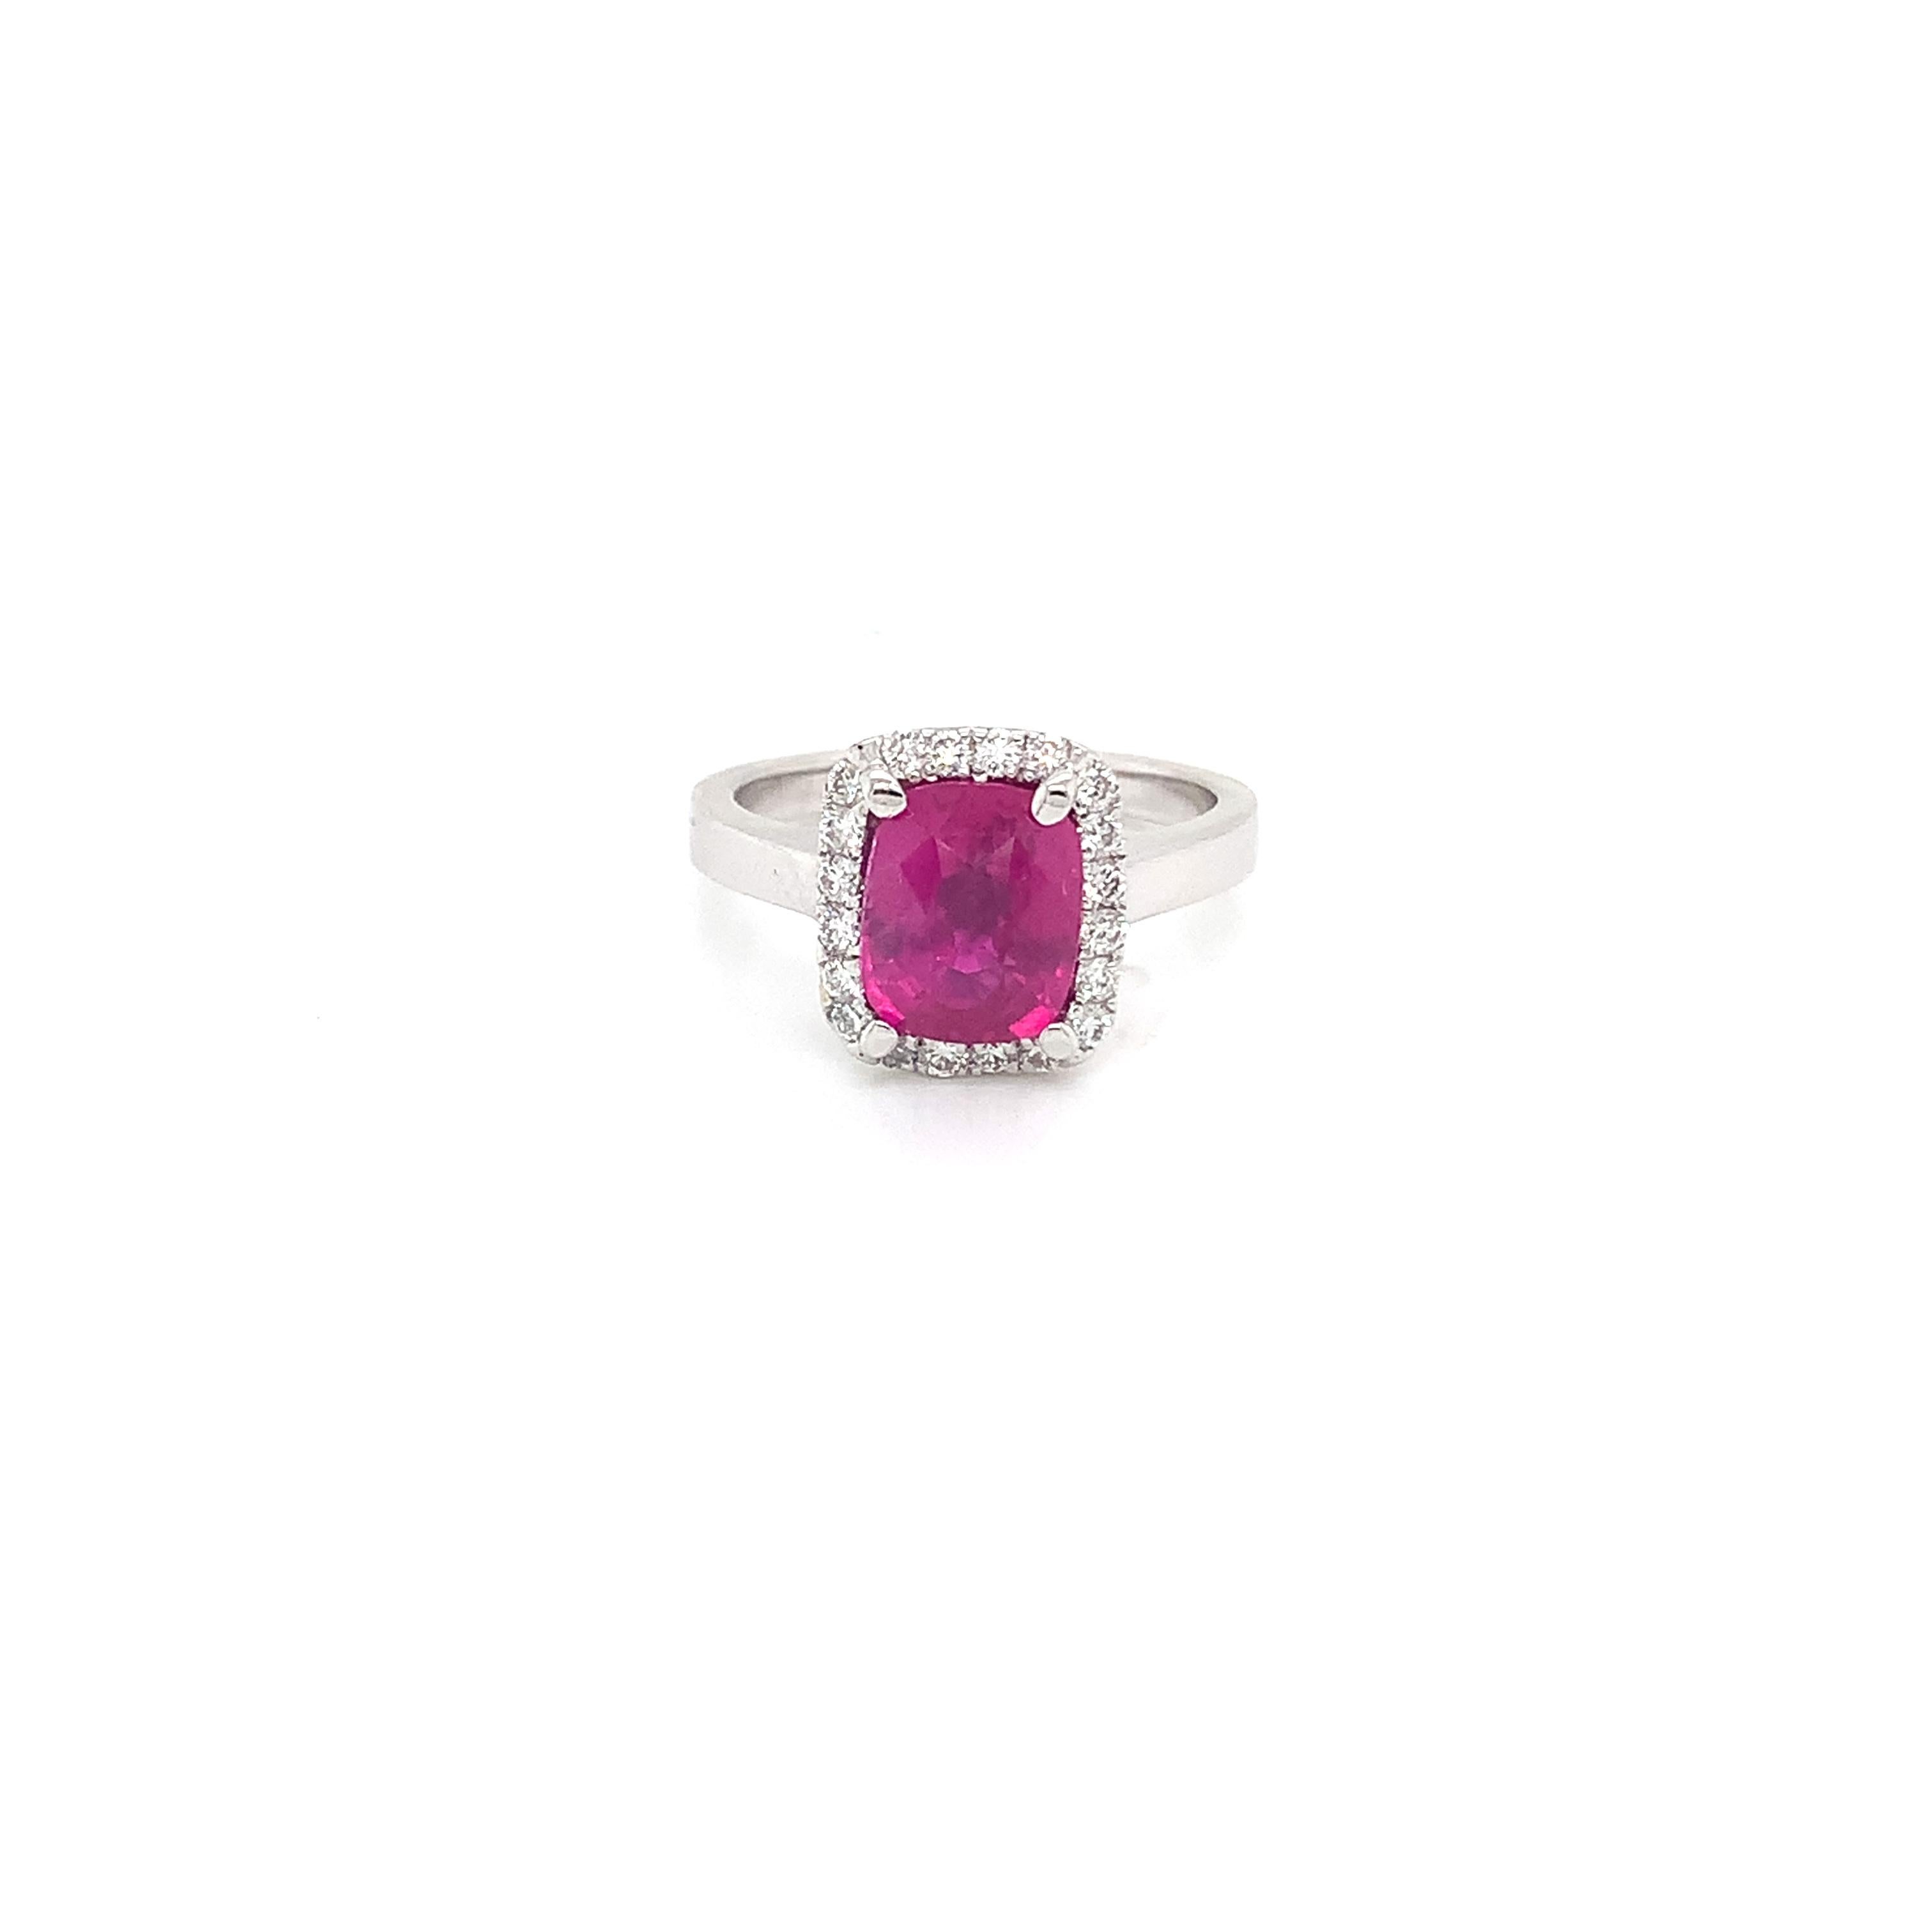 GIA certified ruby weighing 2.71 cts
Measuring (8.51x7.01) mm
20 pieces of diamonds weighing .30 cts.
Set in 14k white gold ring